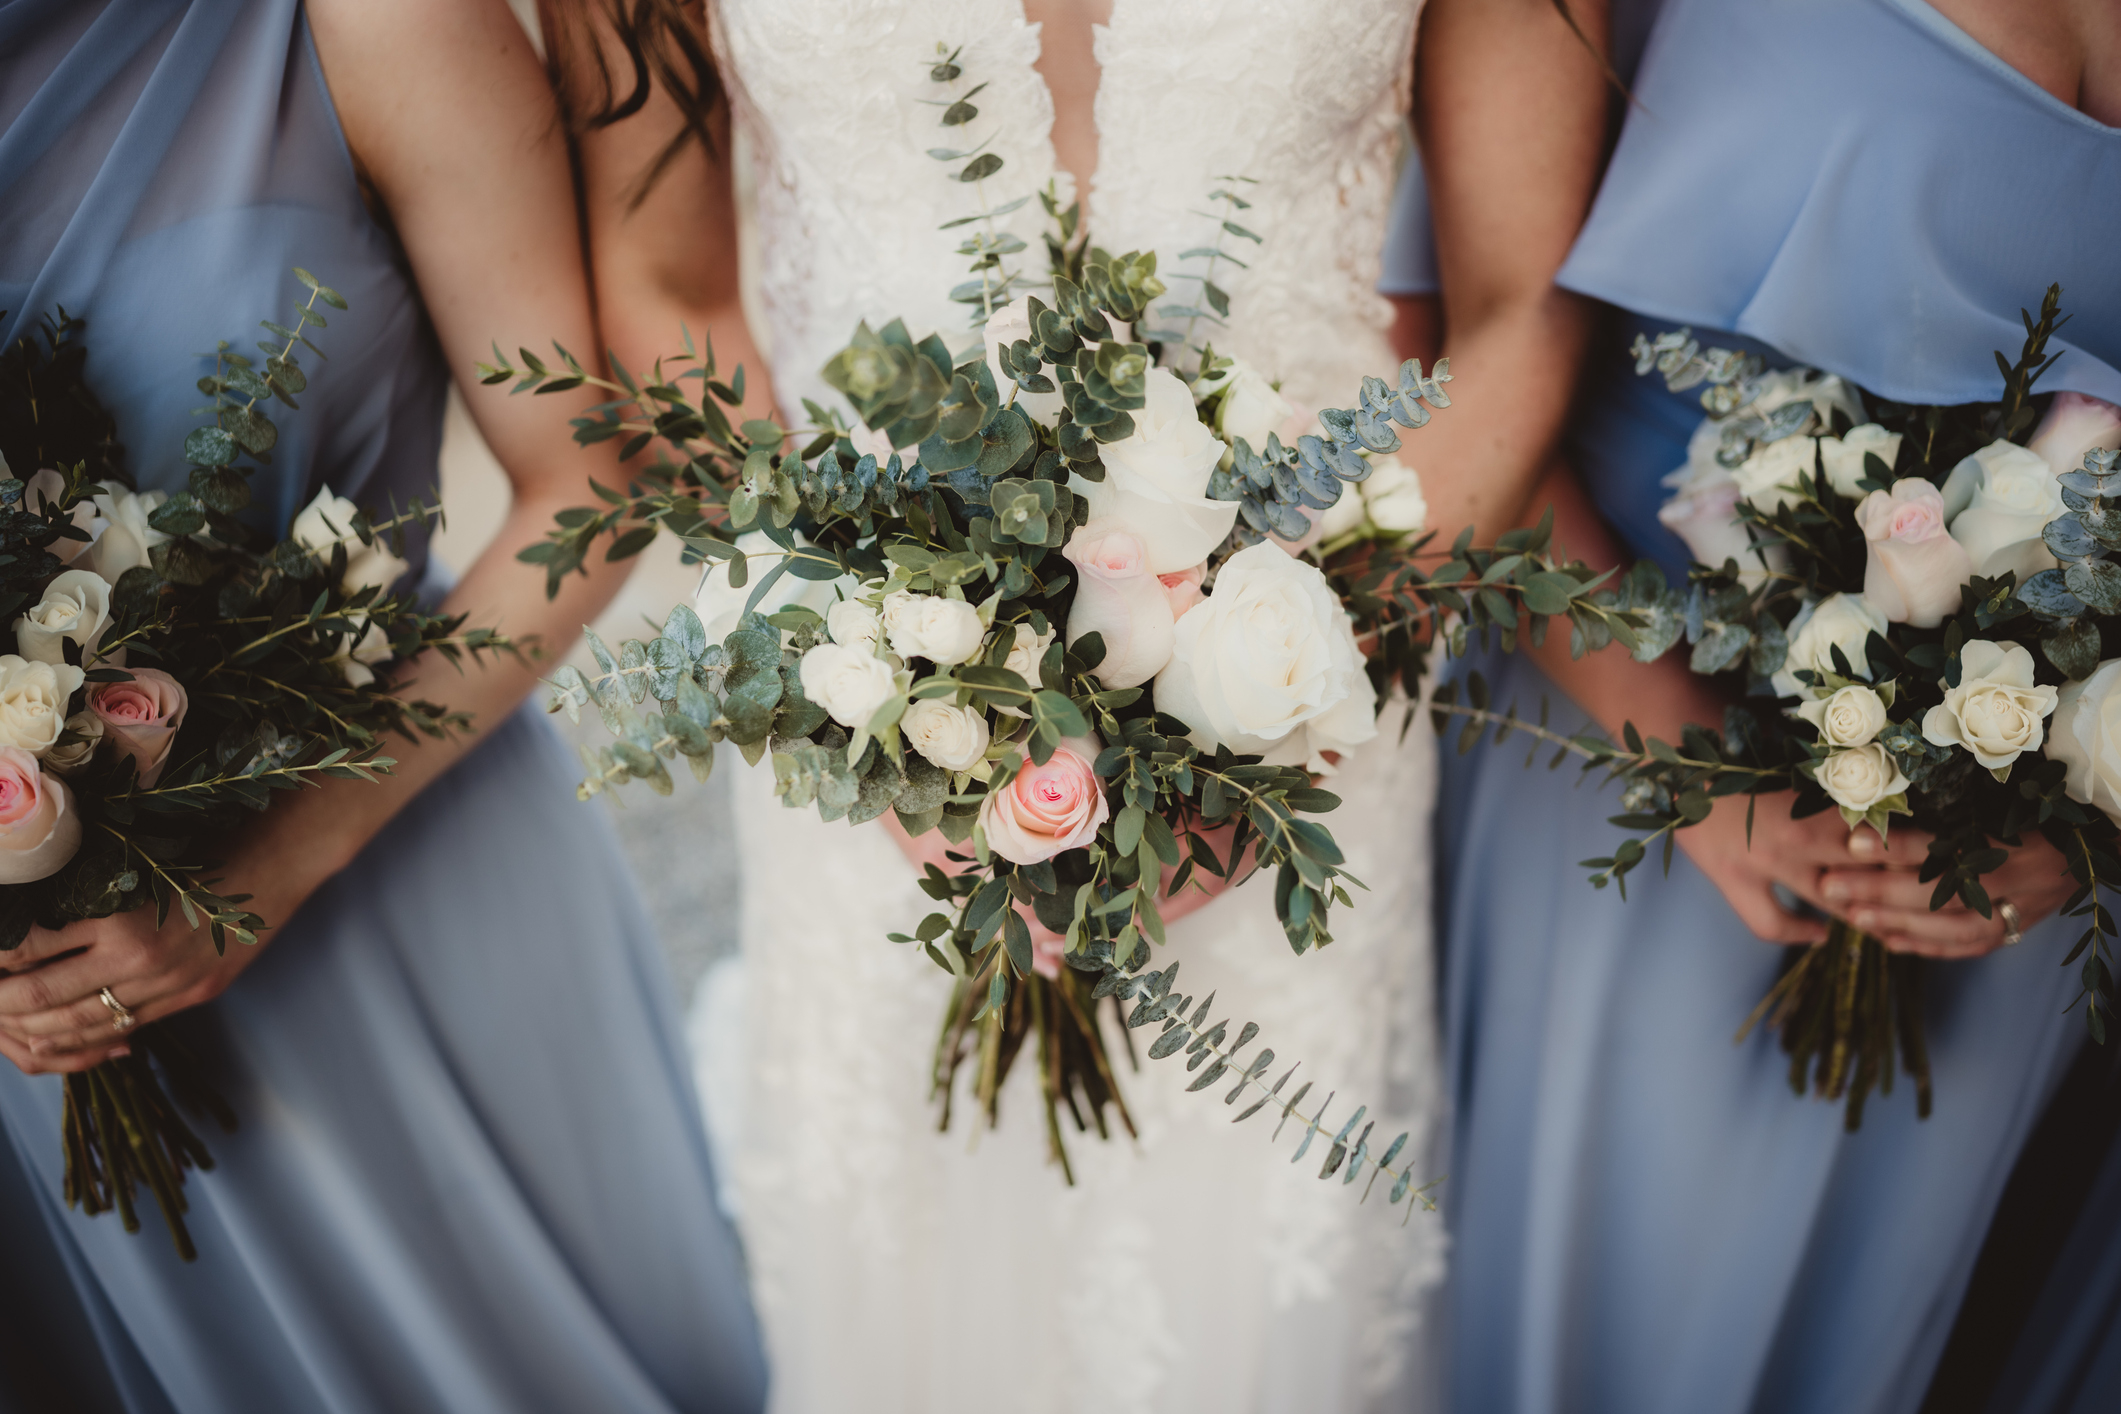 Bride in a lace dress and bridesmaids in blue, holding bouquets, at a wedding